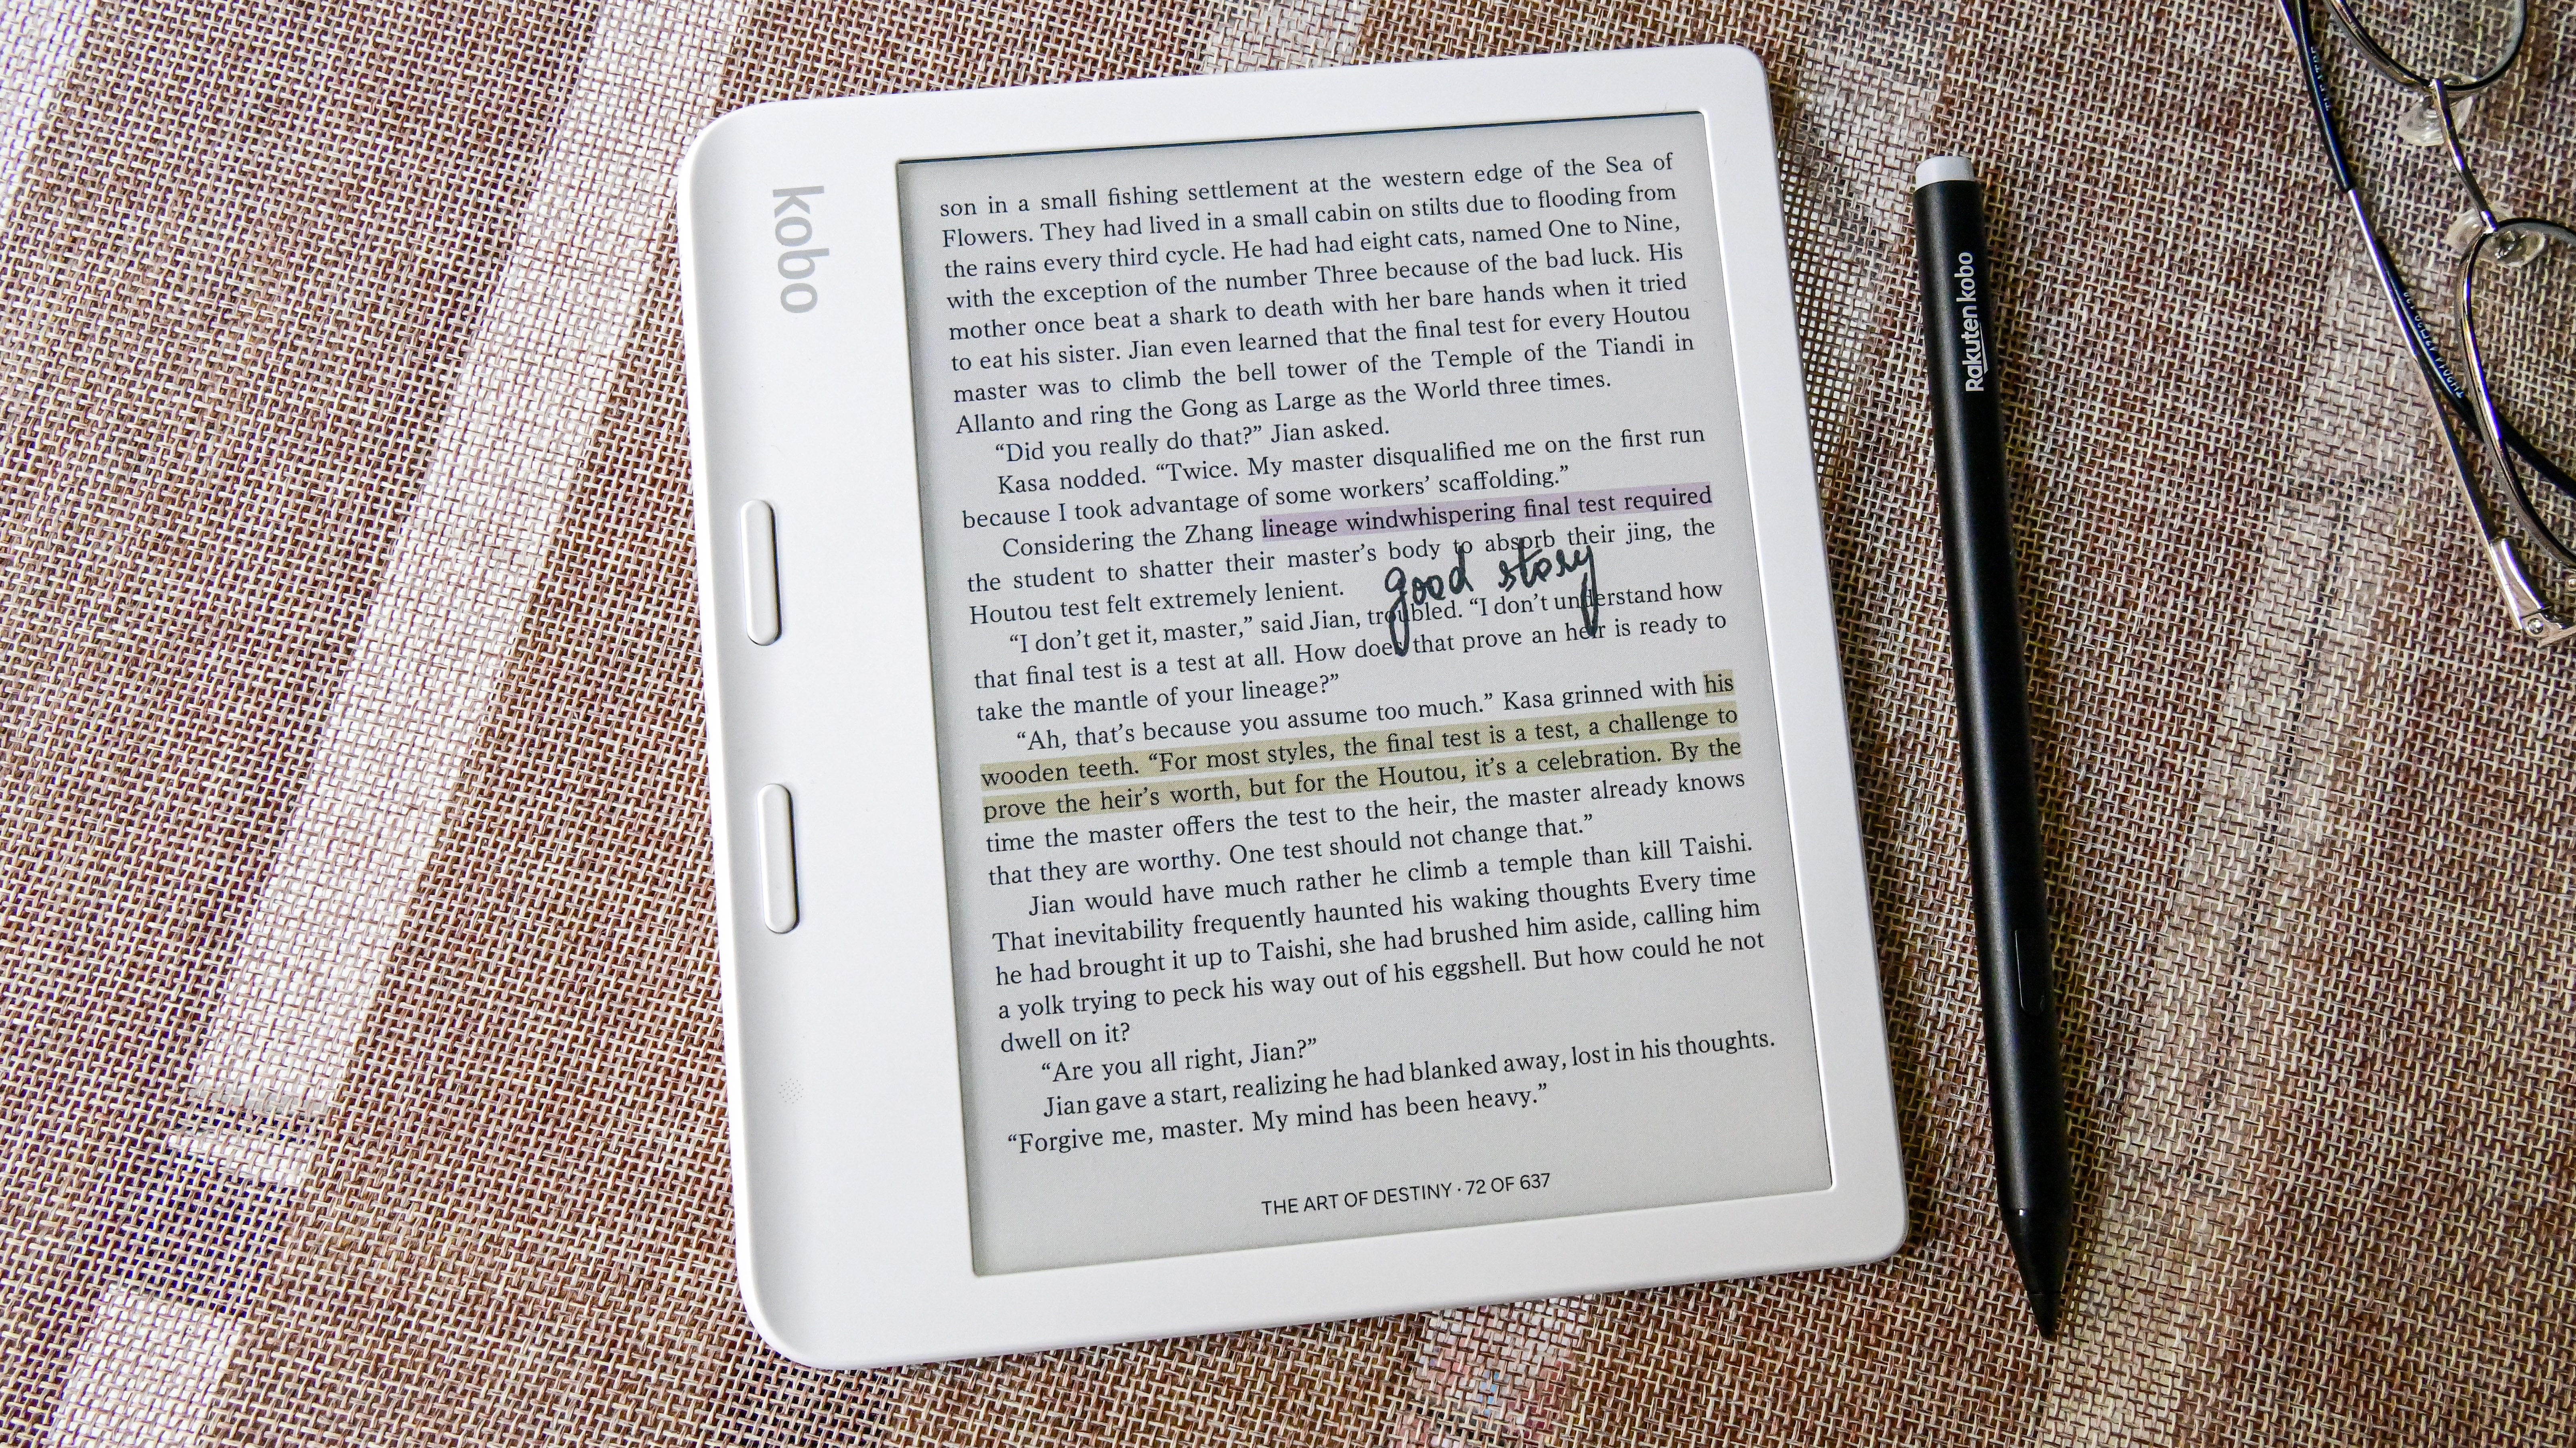 Highlights and handwritten annotations on the Kobo Libra Colour ereader